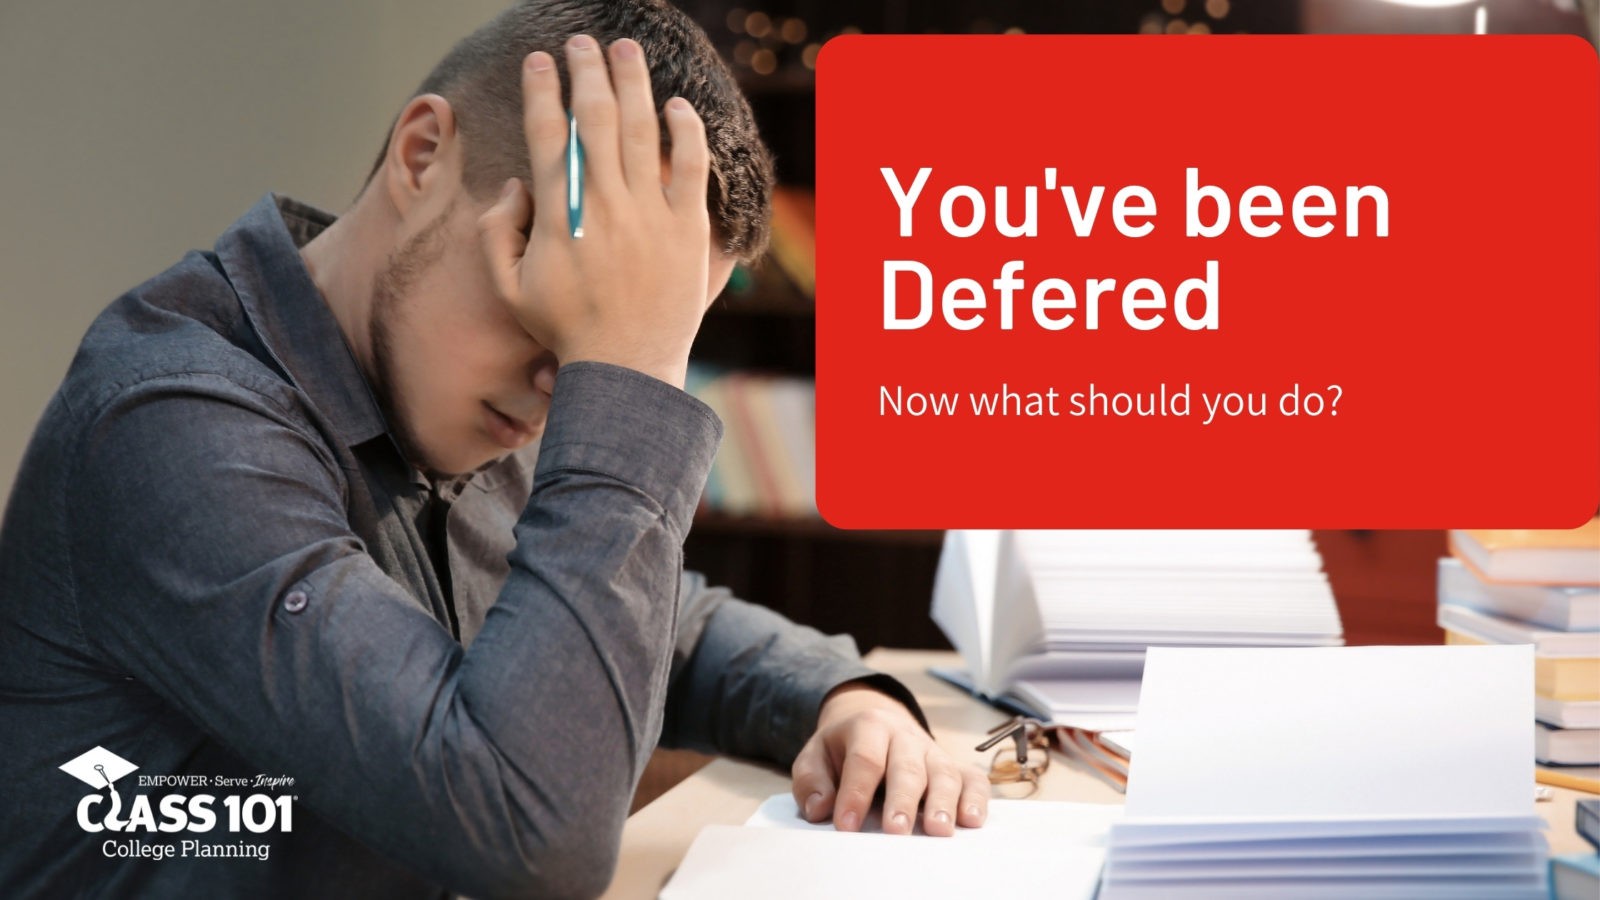 You have been deferred – now what?